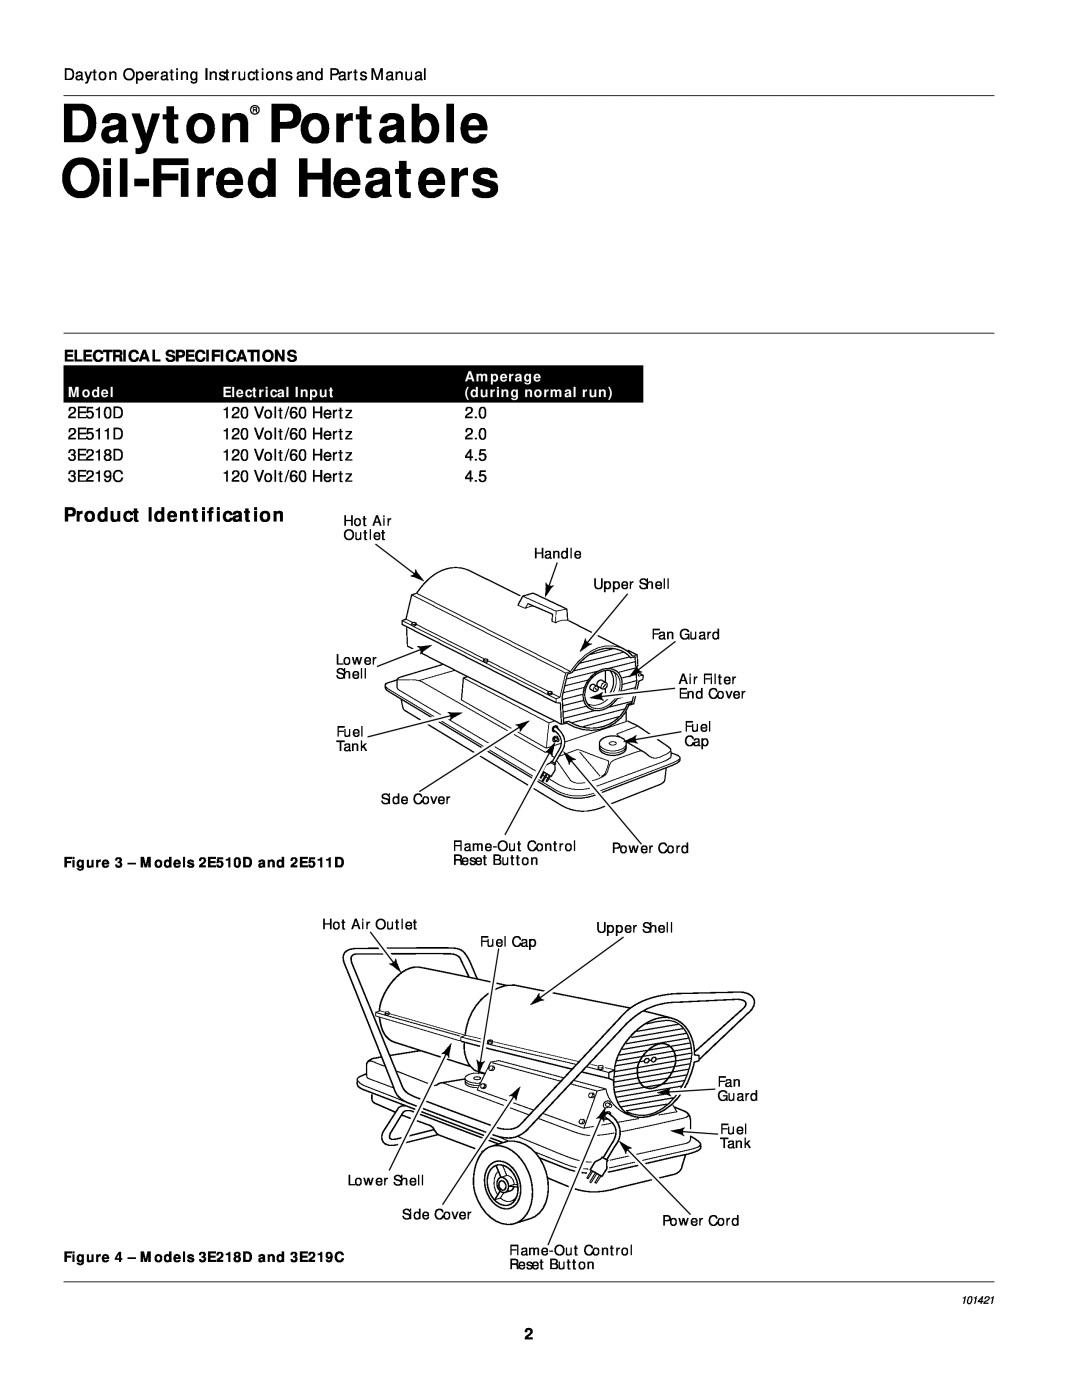 Dayton 3E218D, 3E219C, 2E511D Dayton Portable Oil-FiredHeaters, Product Identification, Electrical Specifications 